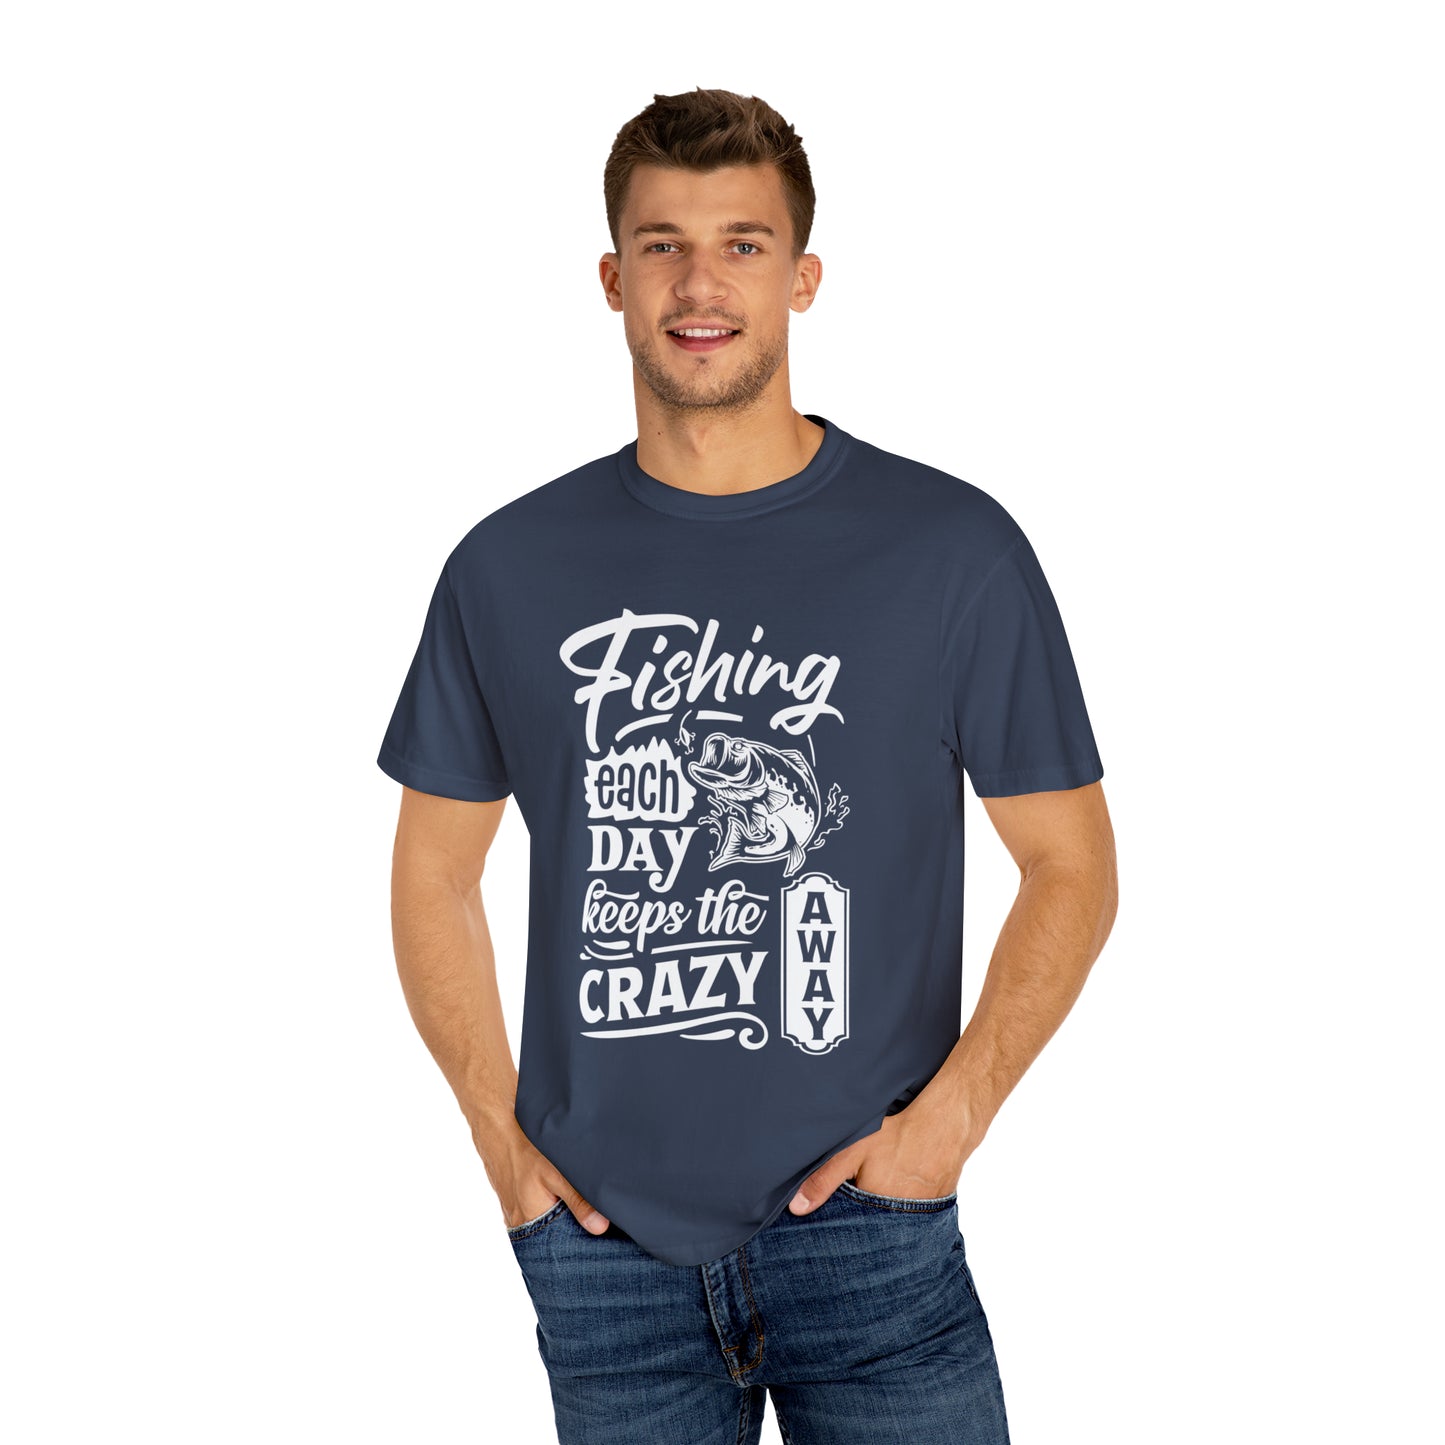 Stay Sane with Daily Fishing Adventures T-shirt